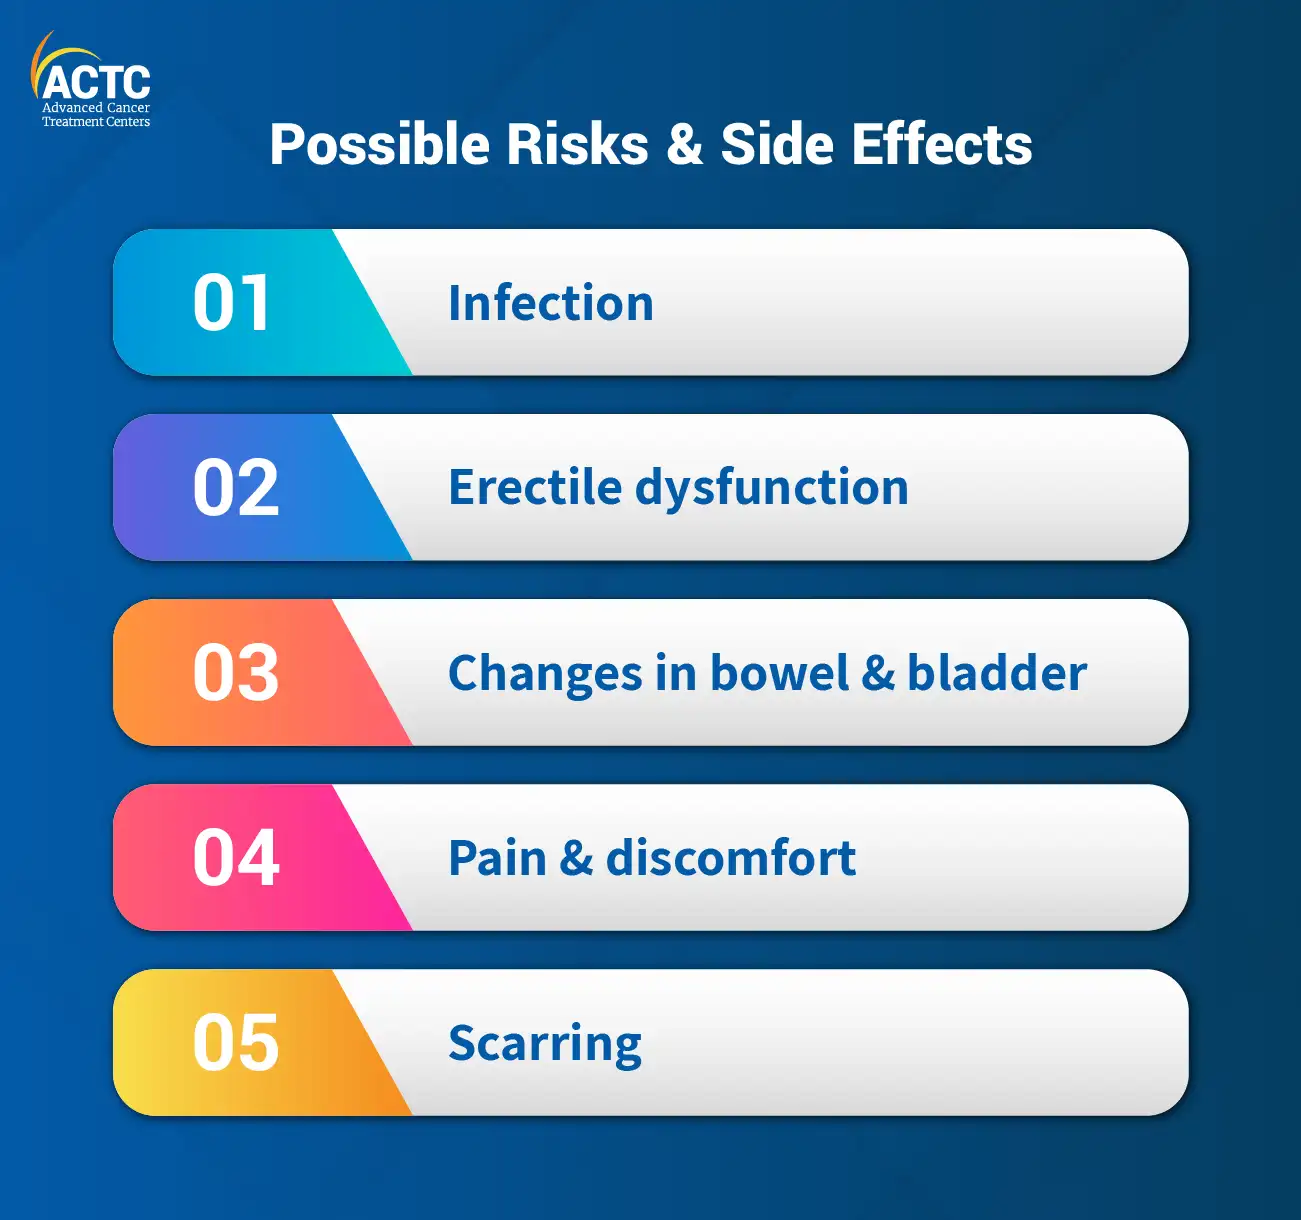 Possible Risks and Side Effects Associated With Surgical Procedures